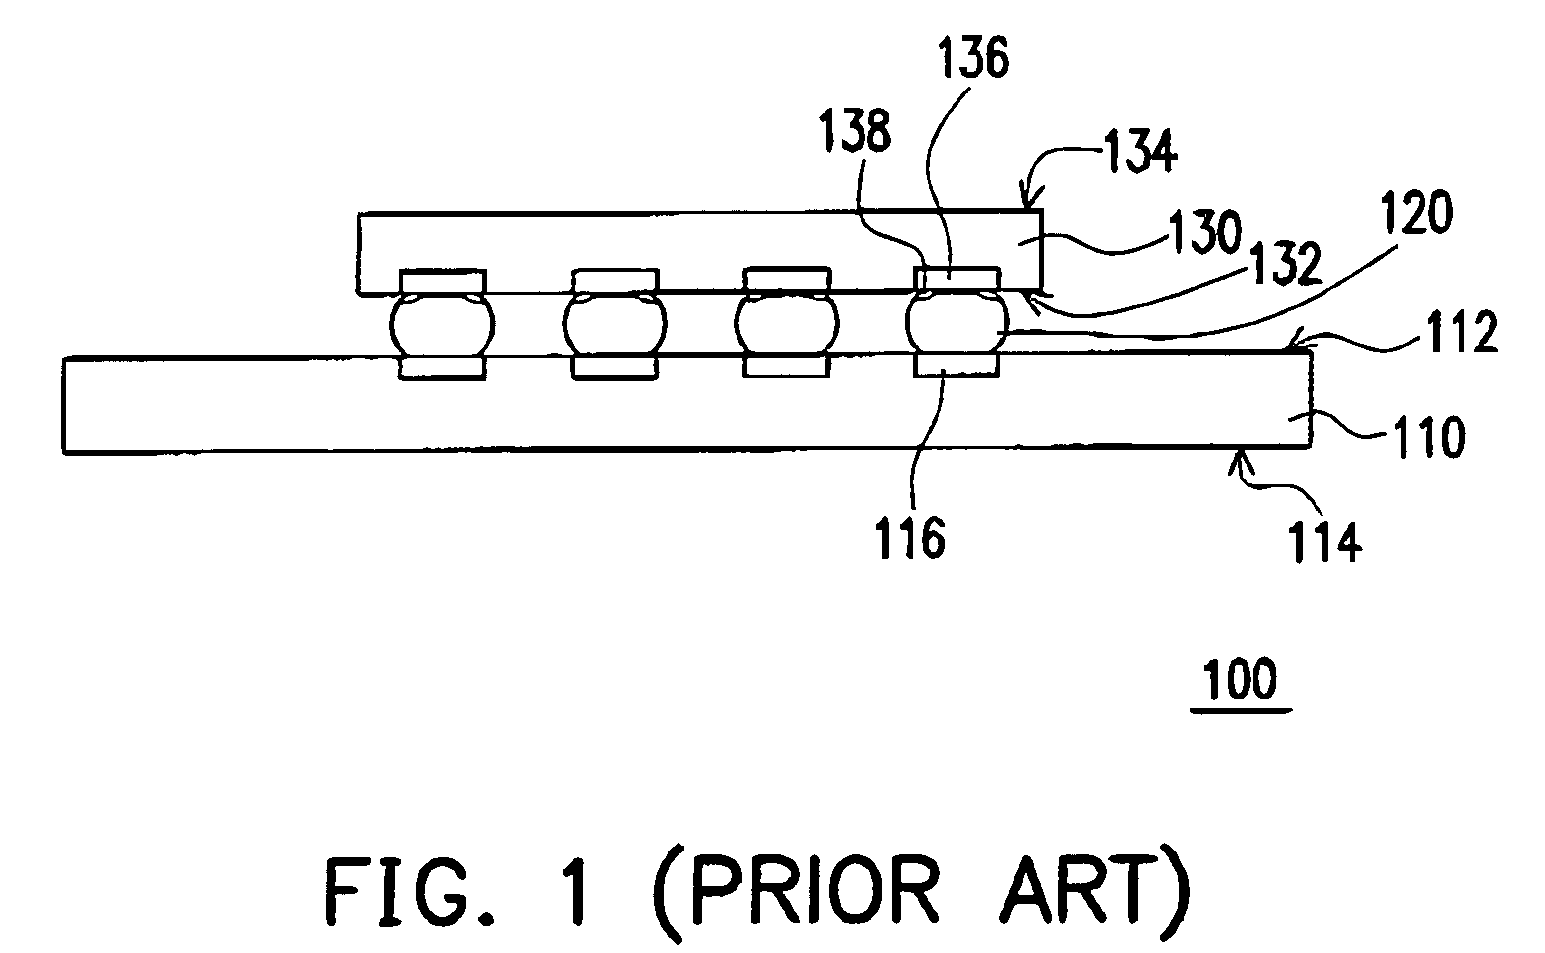 Flip-chip package and fabricating process thereof